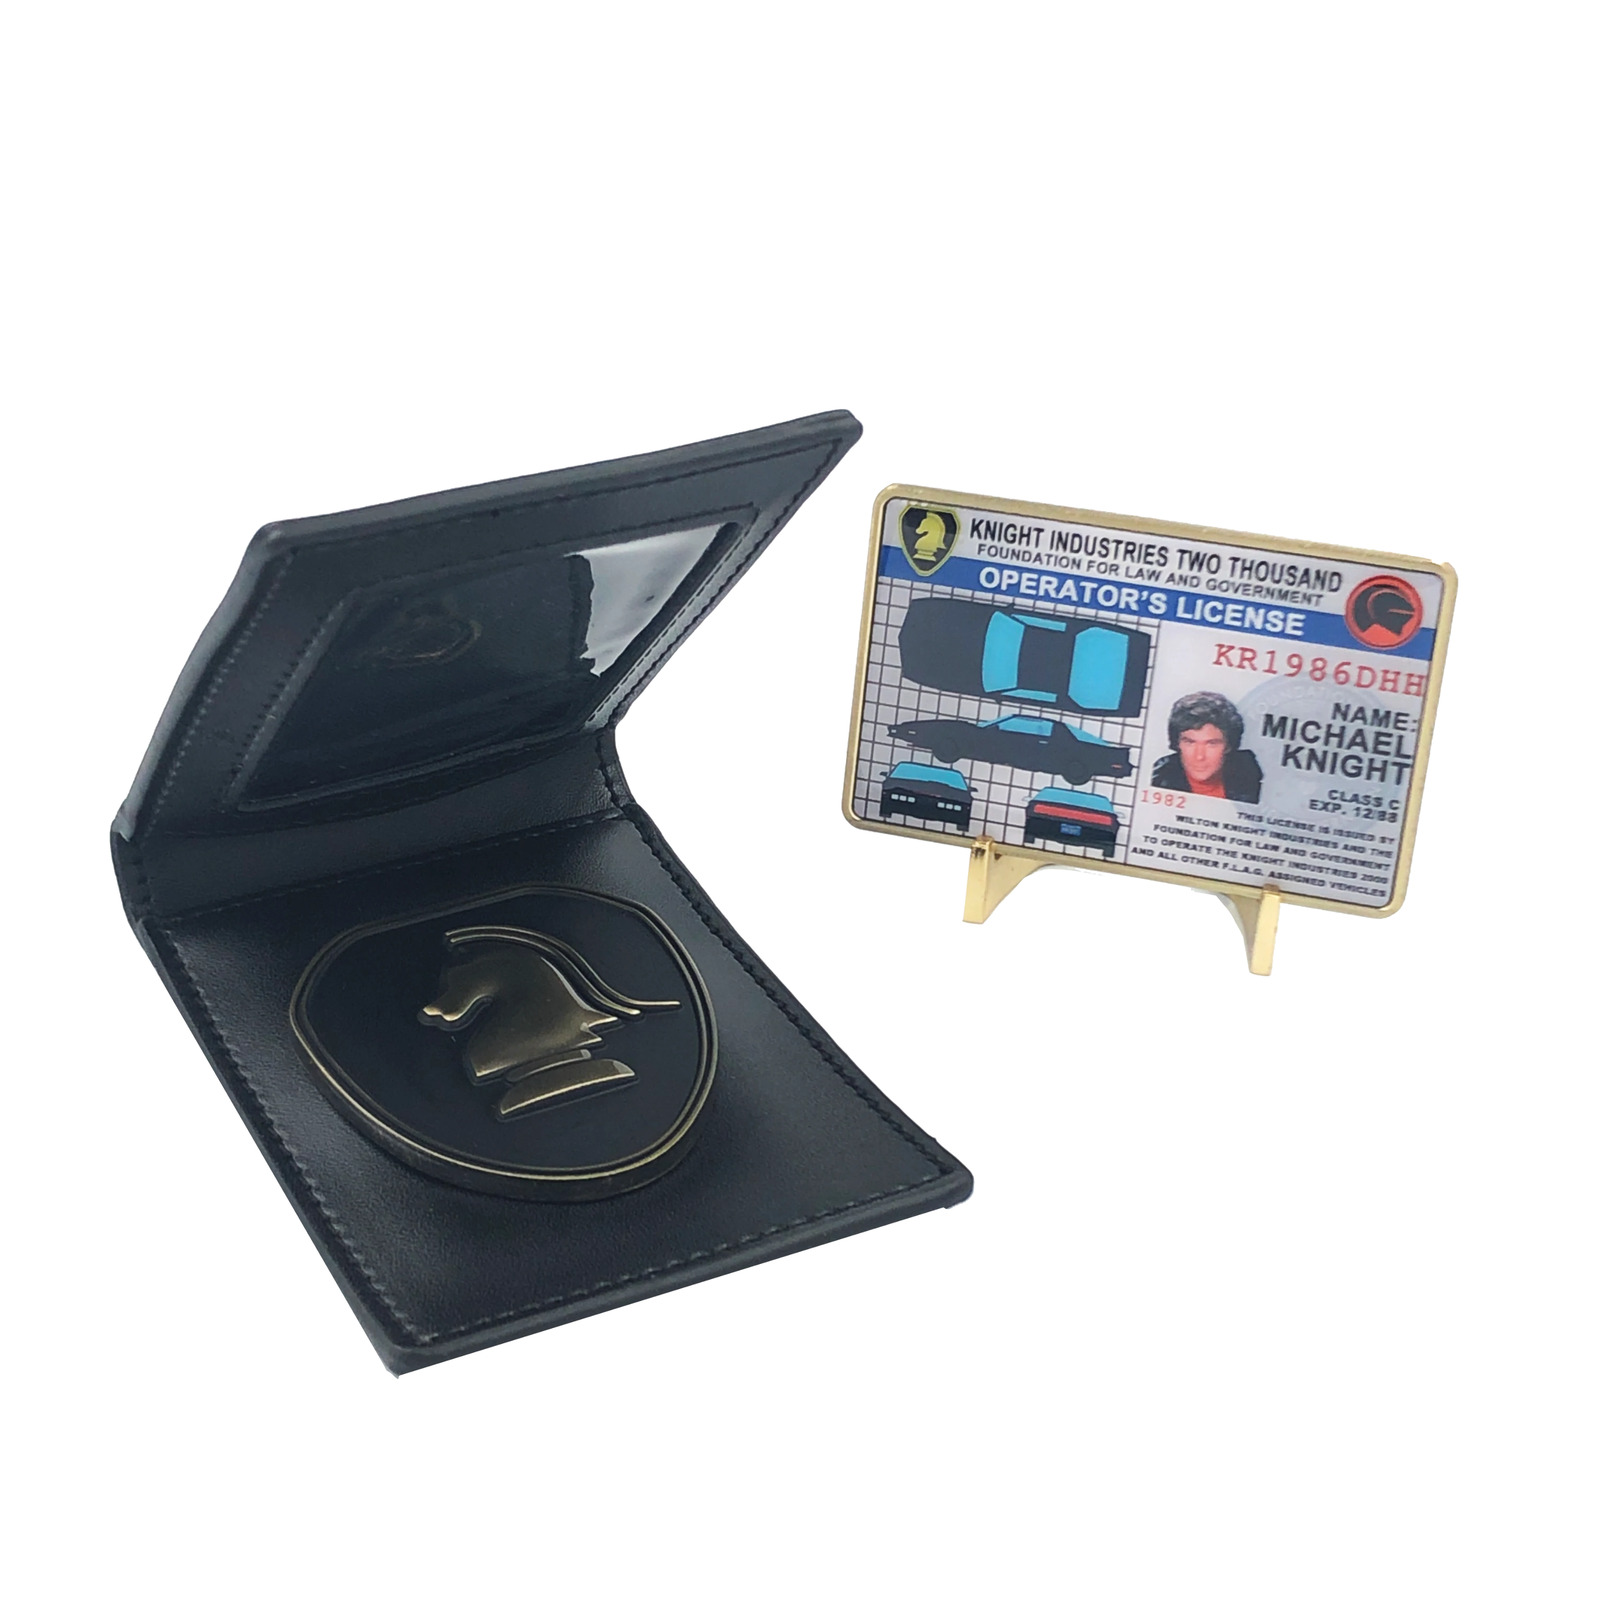 CL-HH Knight Rider in leather wallet with KITT Operator License on Metal Card (c